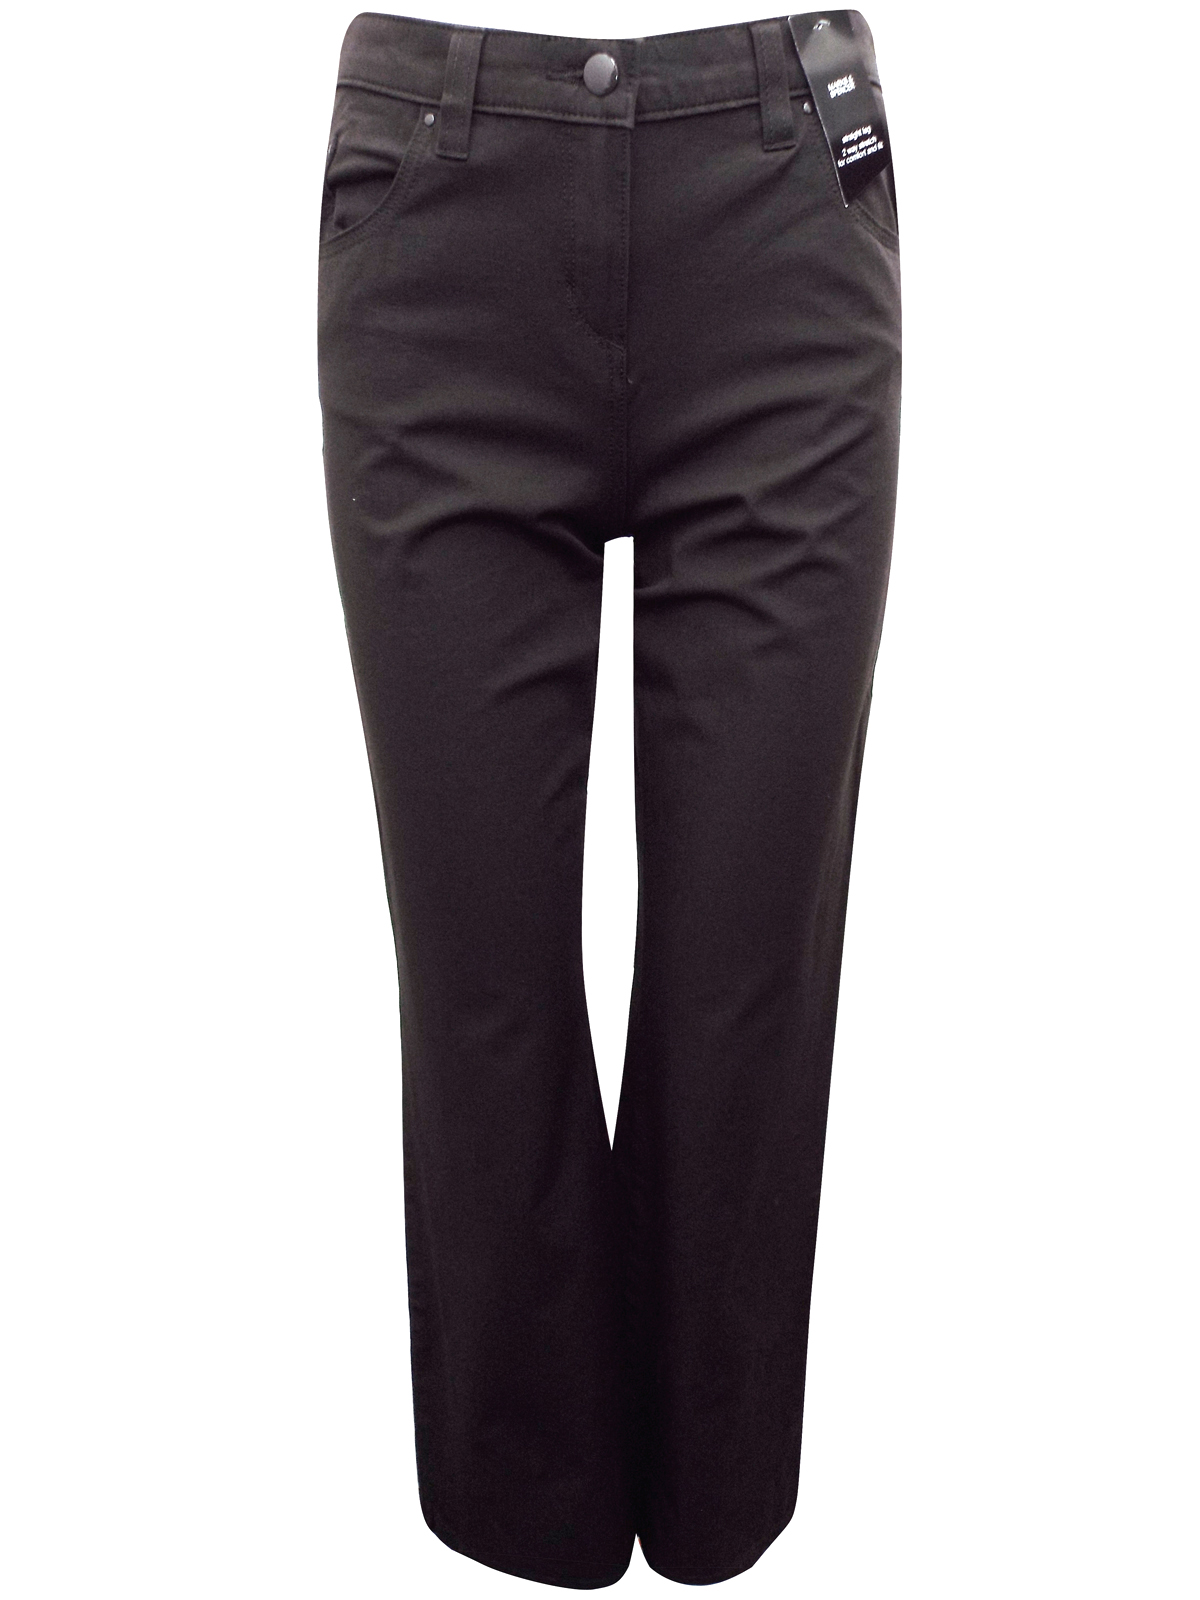 Marks and Spencer - - M&5 CHOCOLATE Straight Leg 2-Way Stretch Trousers ...